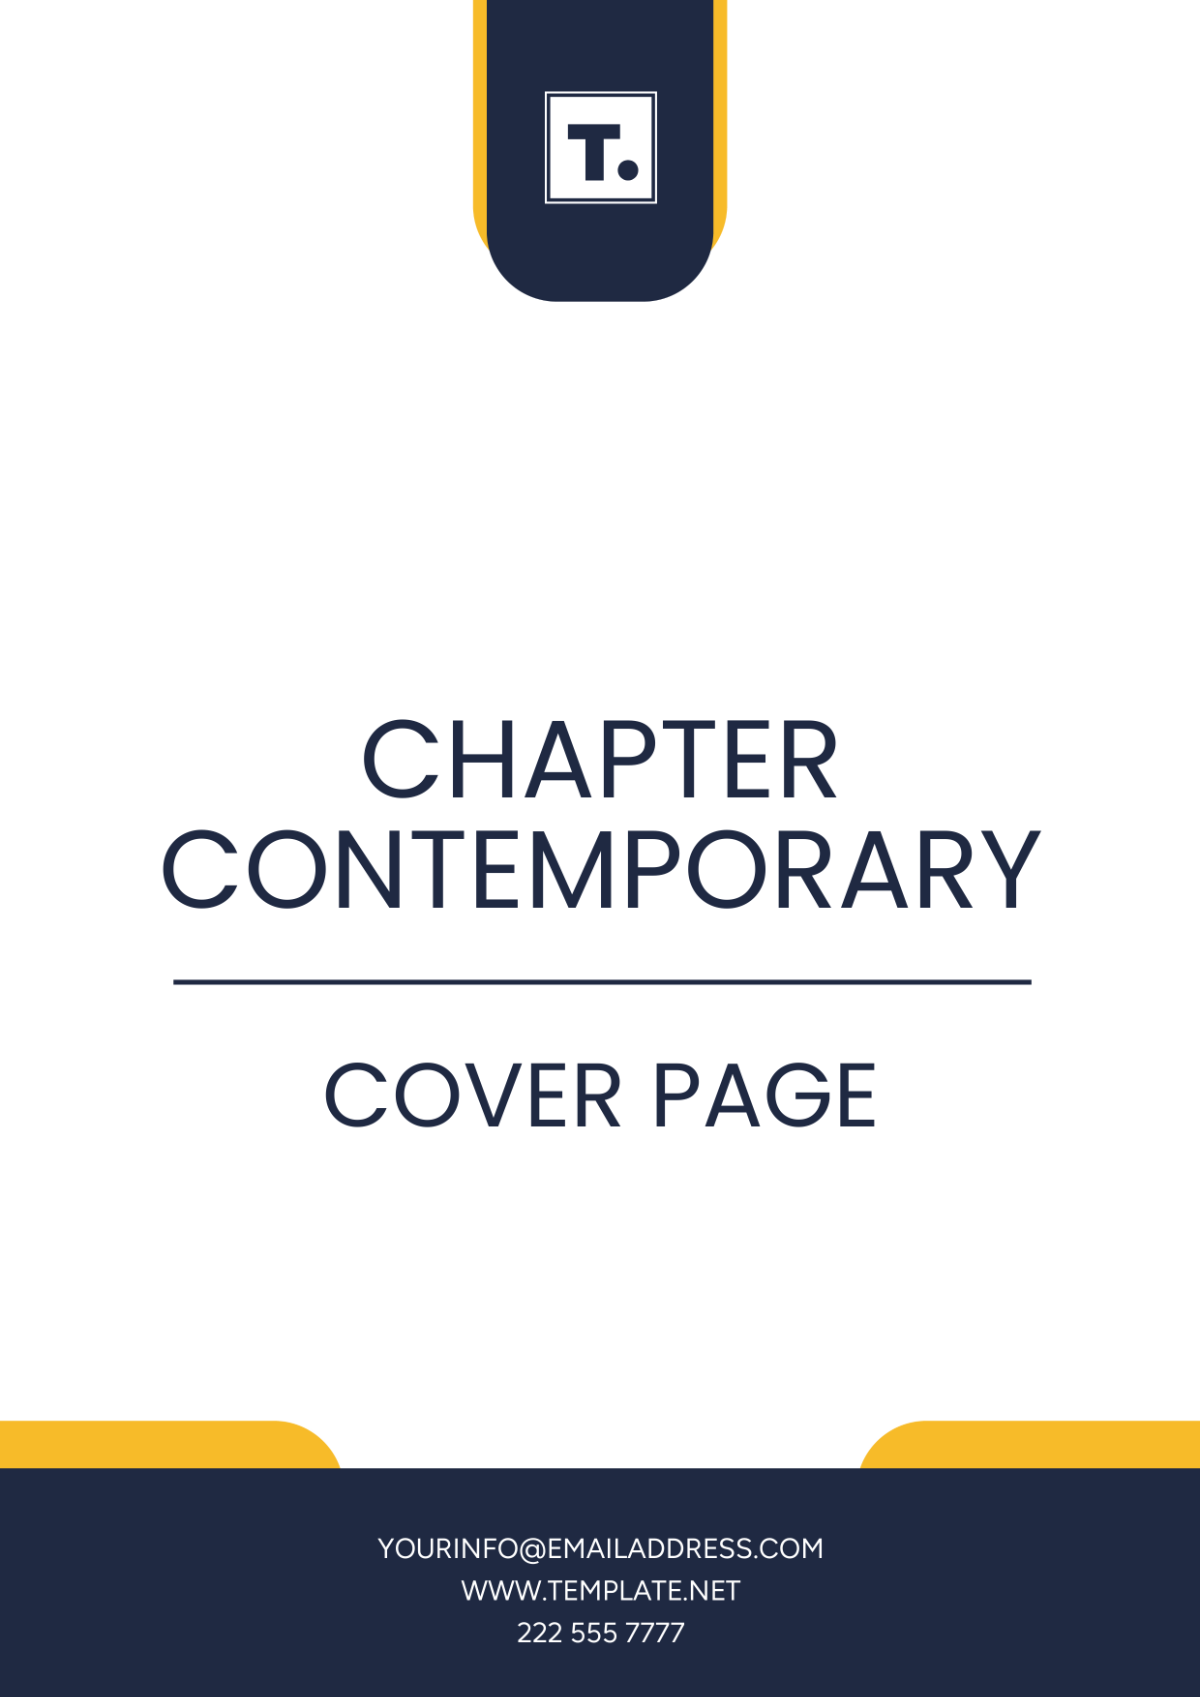 Free Chapter Contemporary Cover Page Template